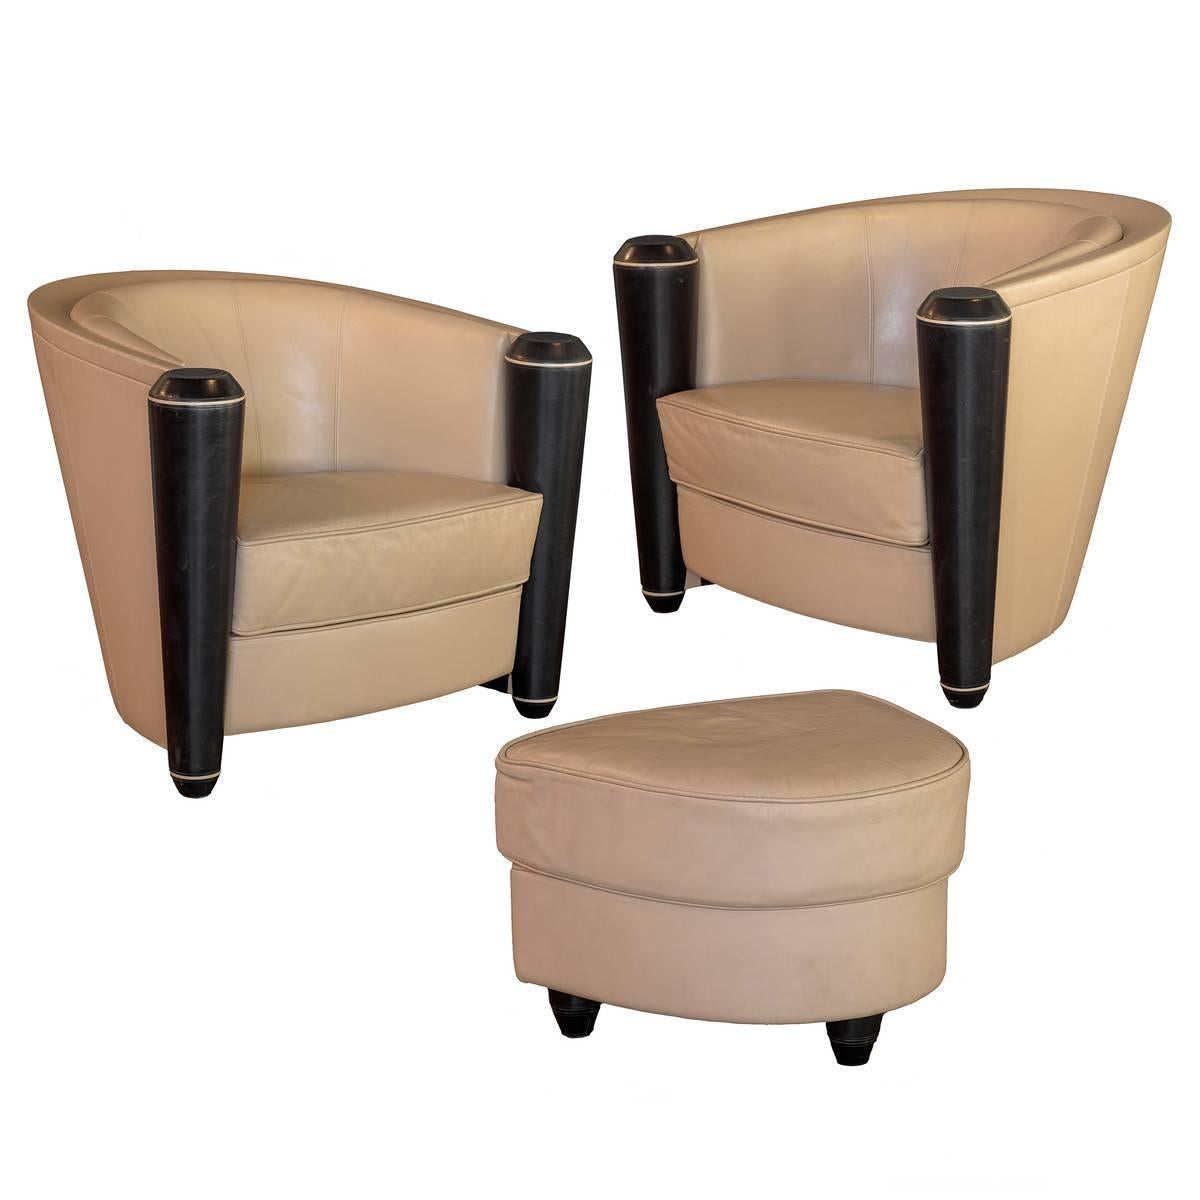 Adam Tihani Pace Collection Pair of Leather Club Chairs and Ottoman